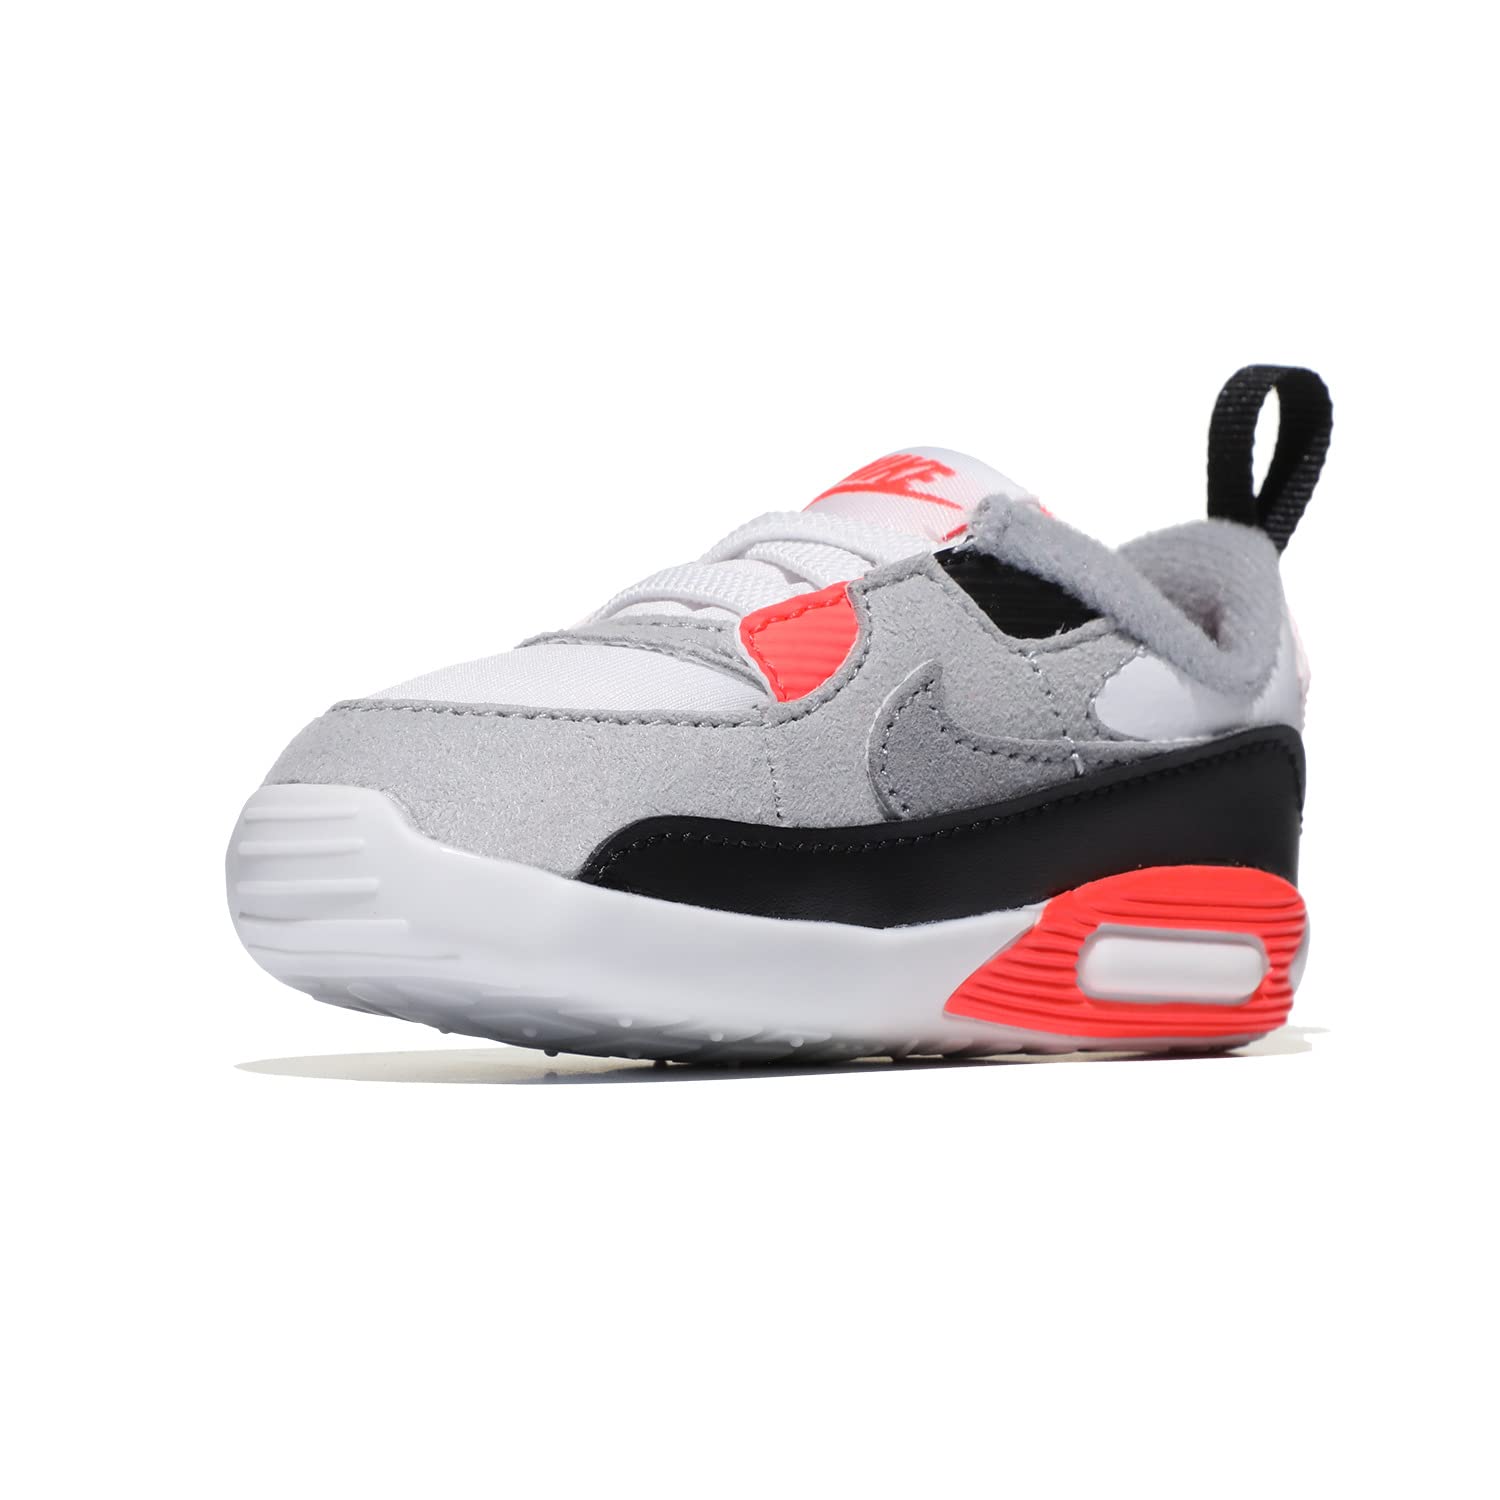 Image 2 of Air Max 90 (Infant/Toddler)